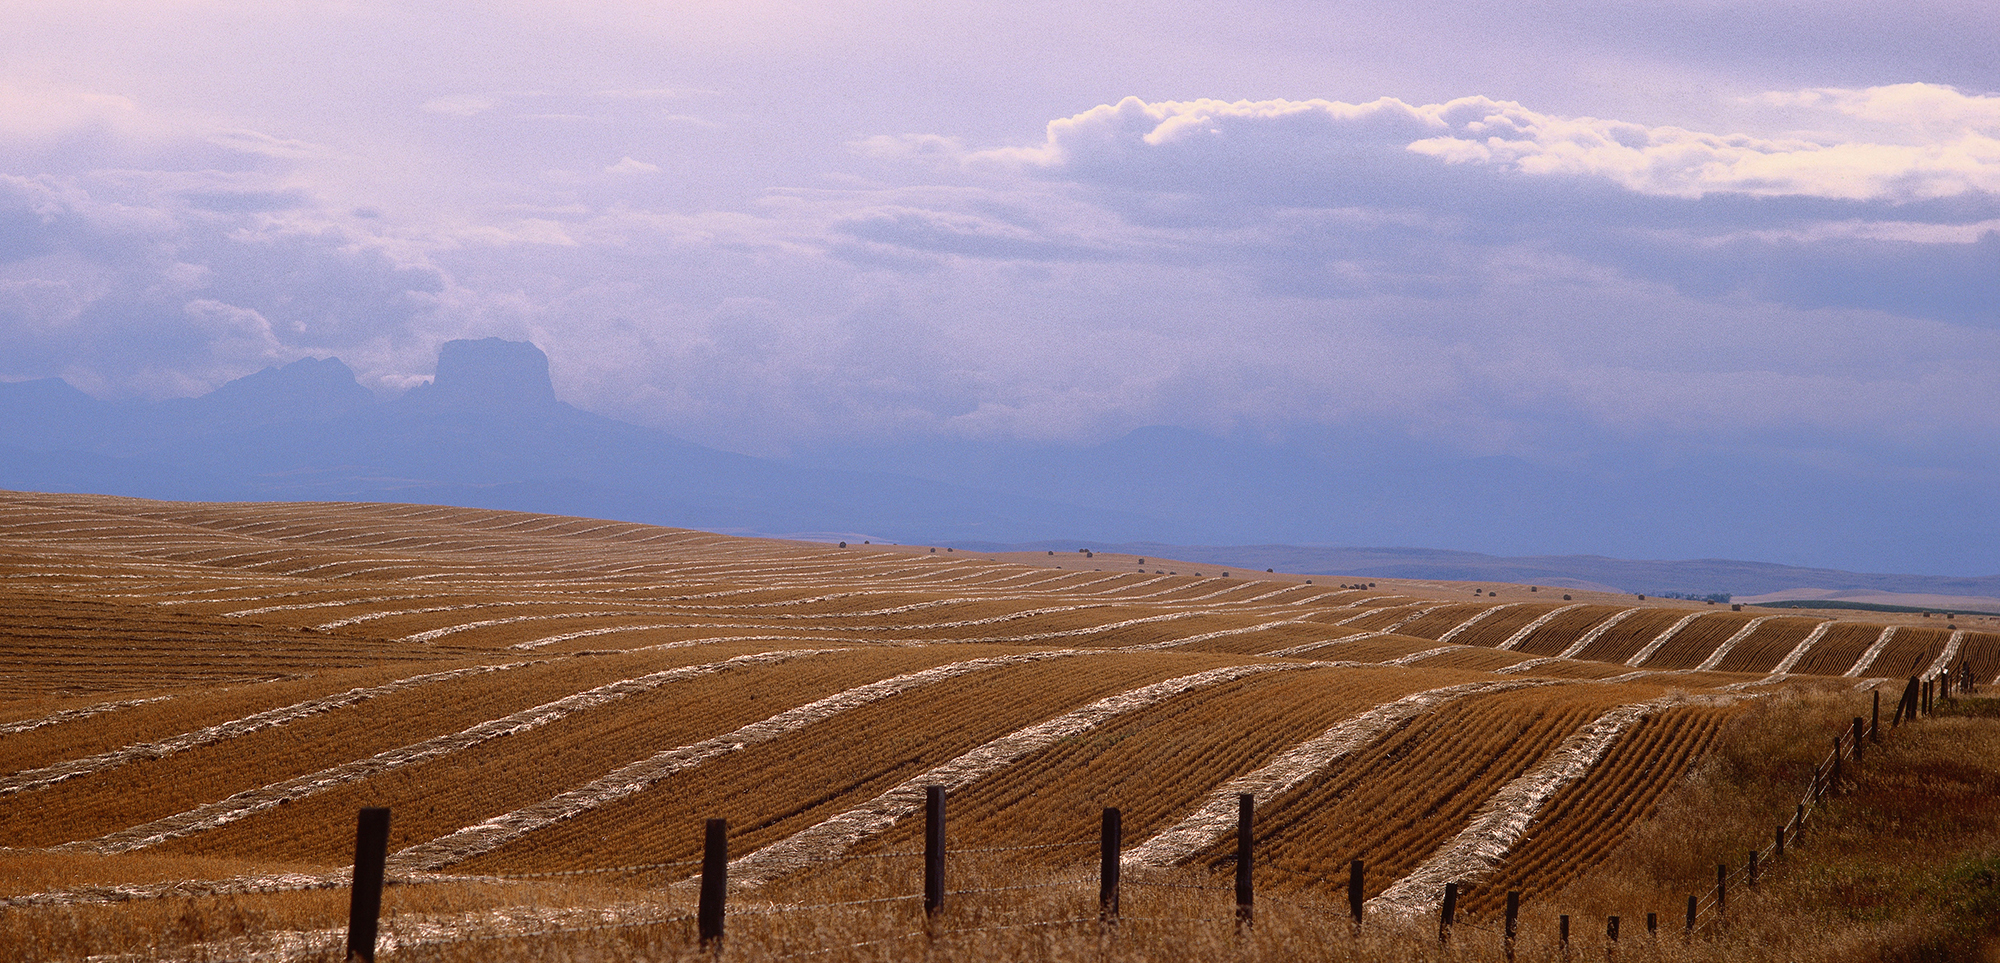 rolling hills of golden fields, a long wired fence in the foreground and a deep purple sky in the background